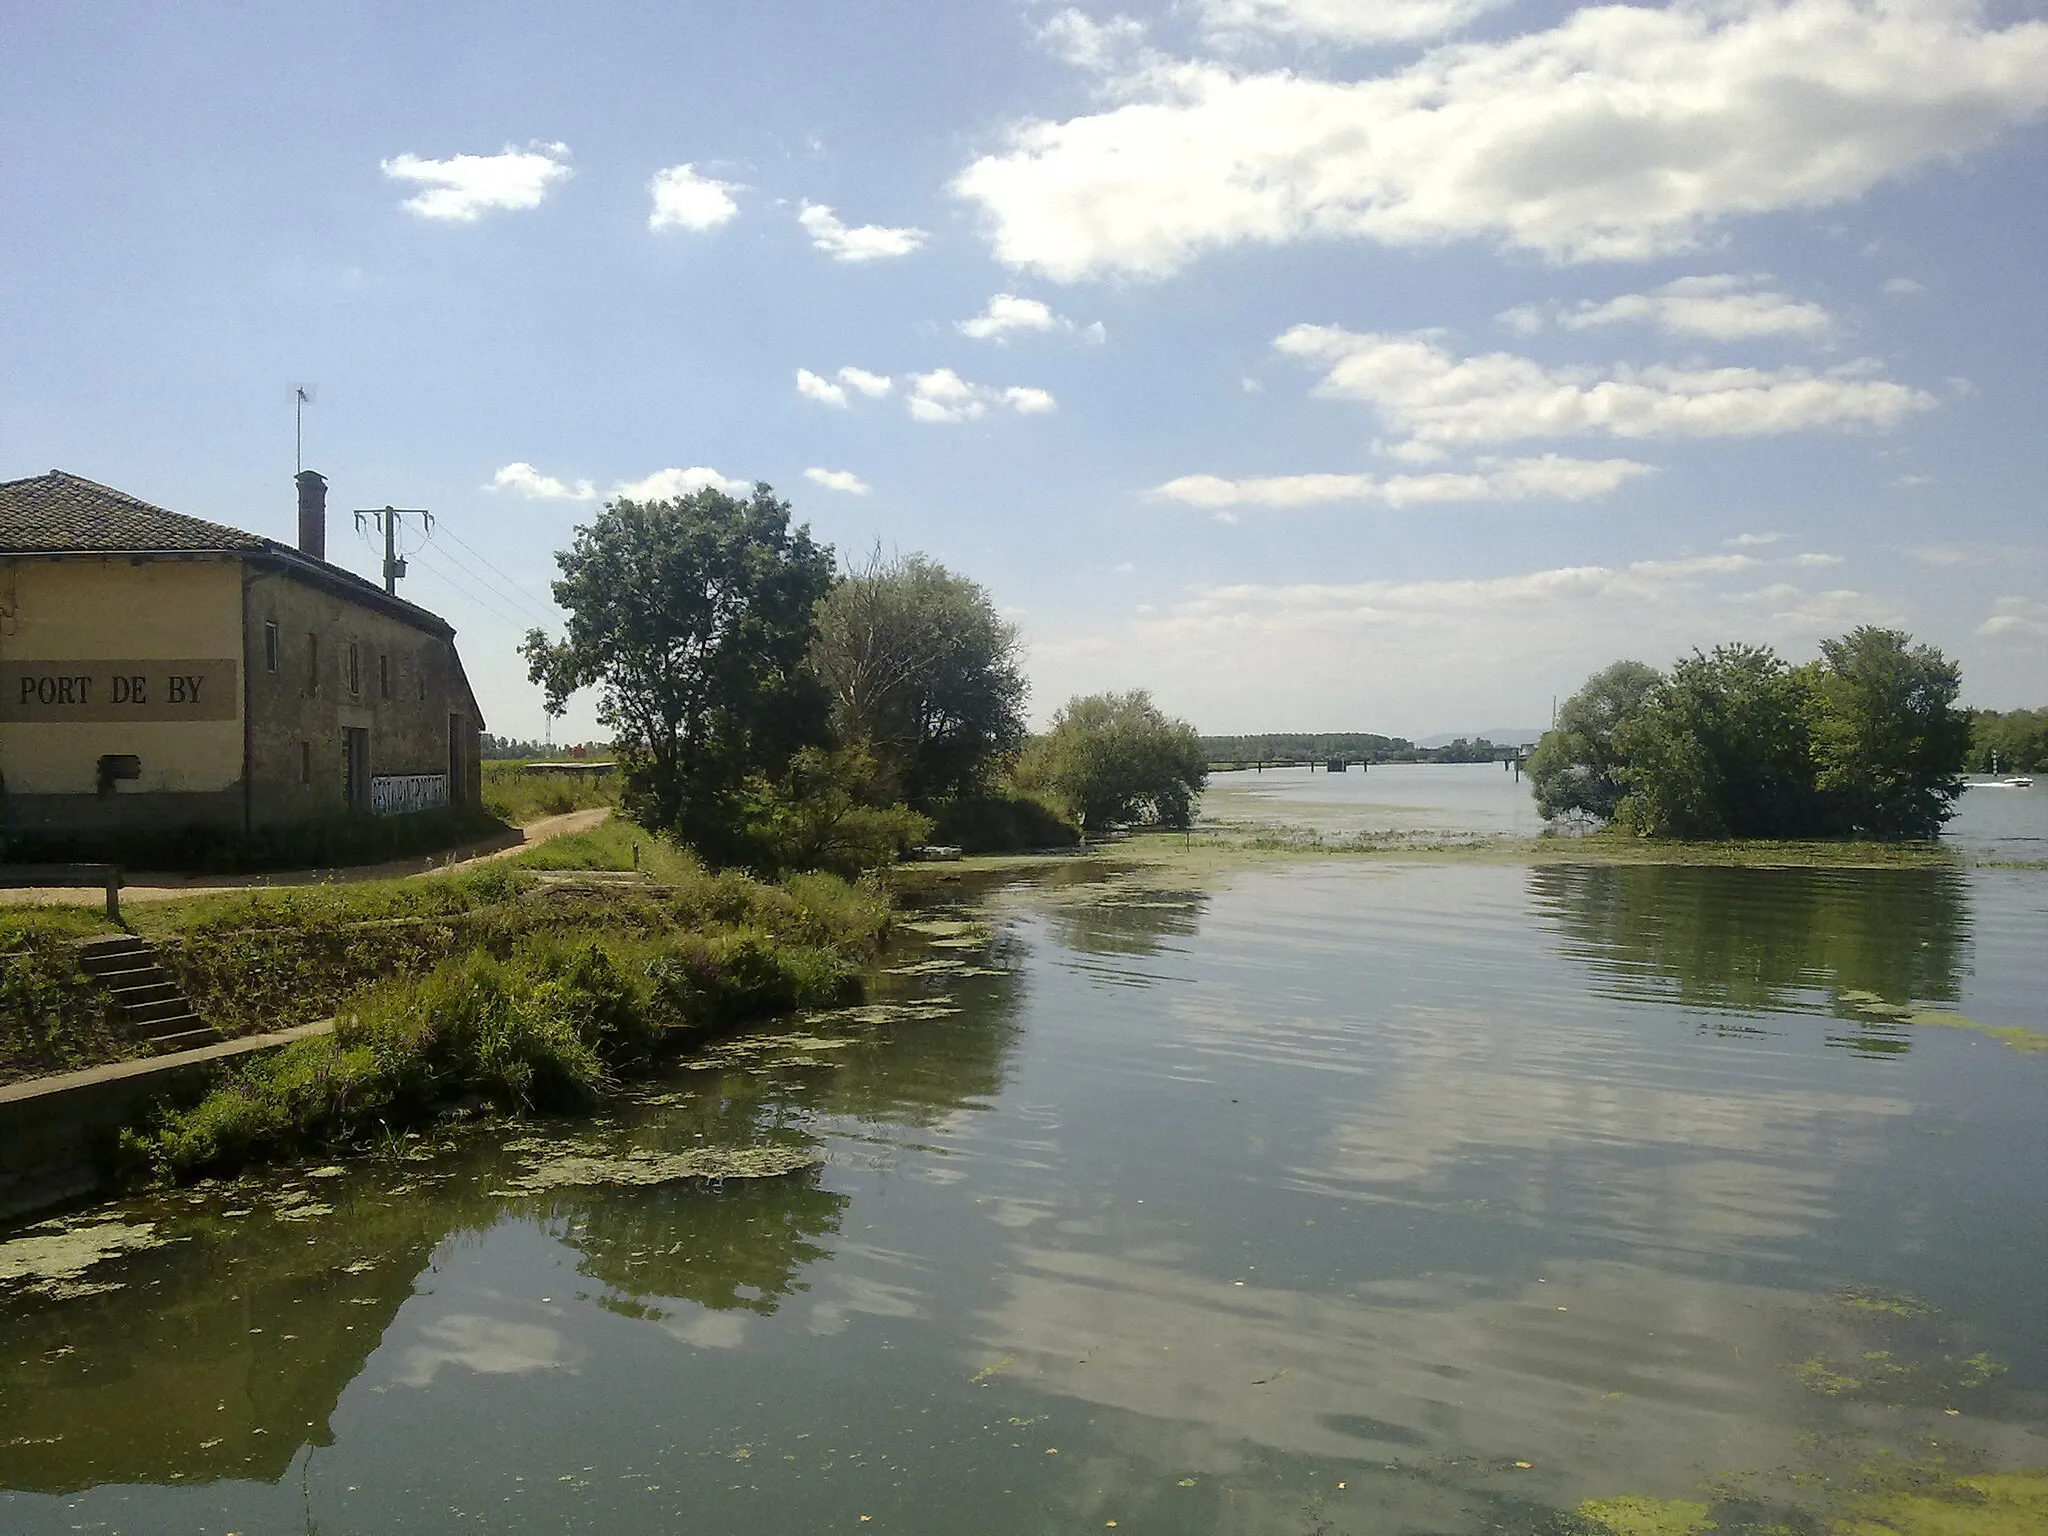 Photo showing: The river Saône at the restaurant "port de By" in Grièges commune, on the D51 road in the Ain departement, in front of Varennes-lès-Mâcon in the Saône-et-Loire departement. The river at this place is the limit between the two departements.